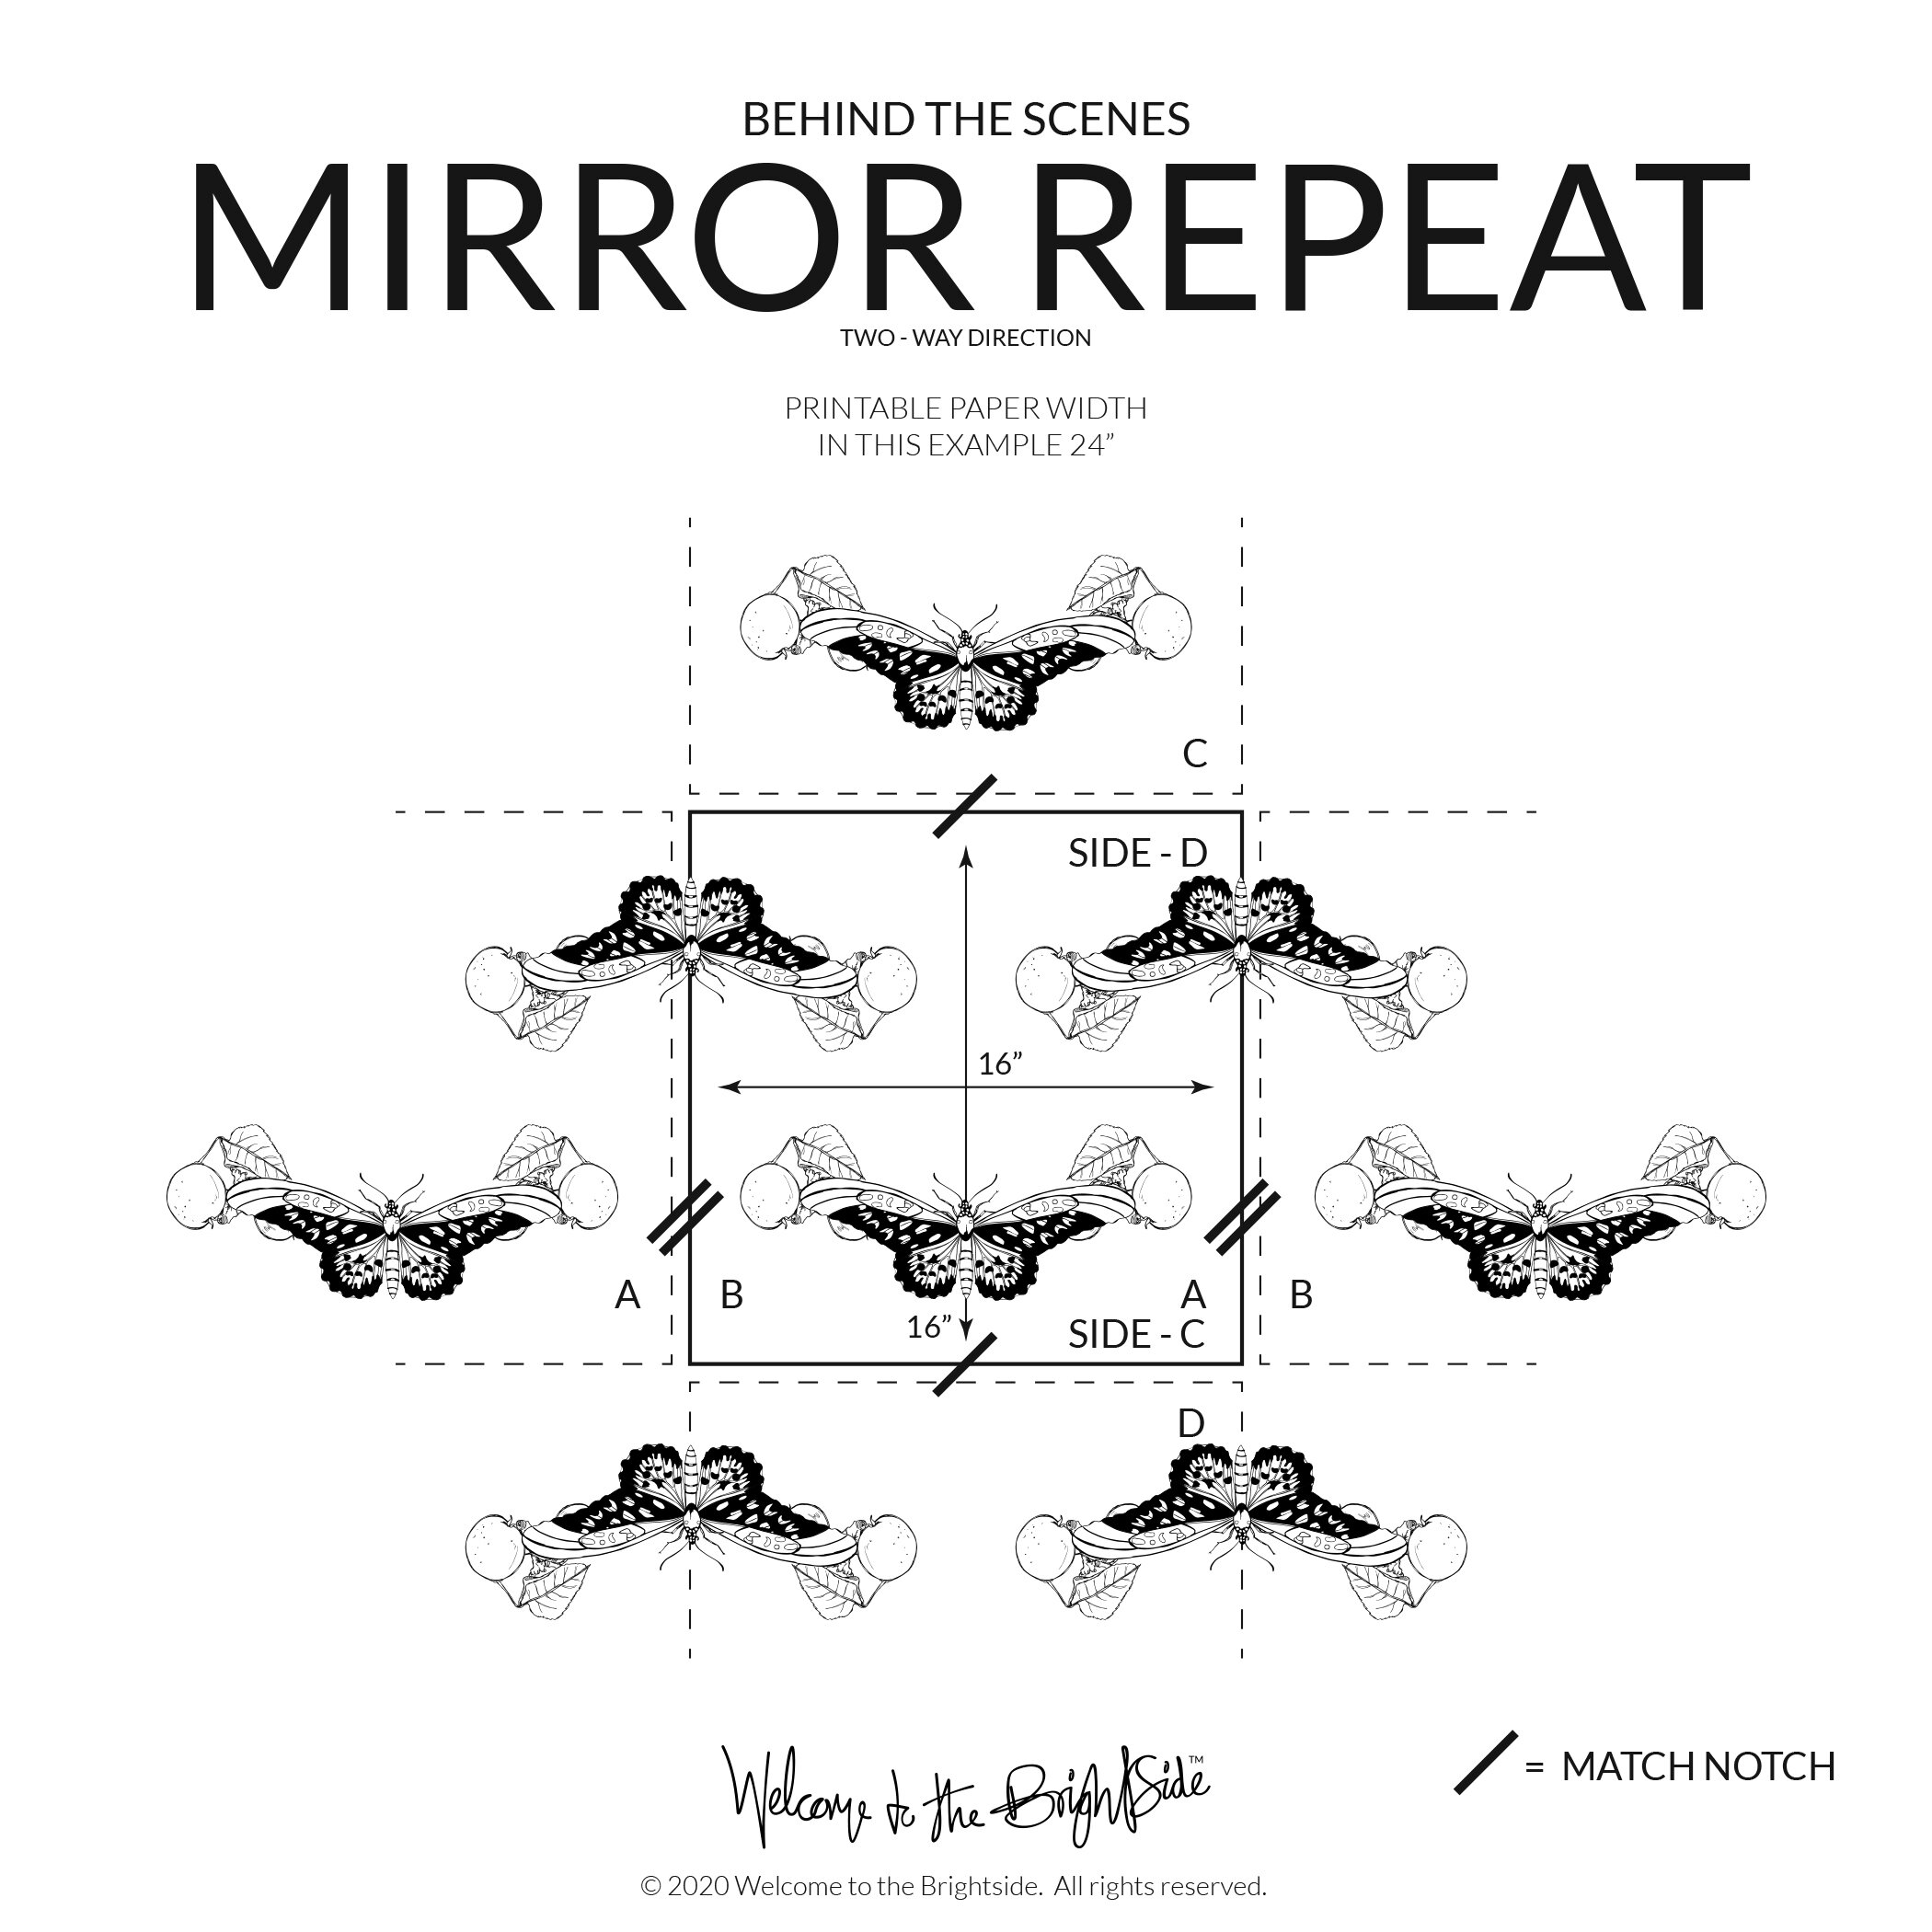 MIRROR-REPEAT_2-DIRECTION_INSTRUCTIONS.jpg